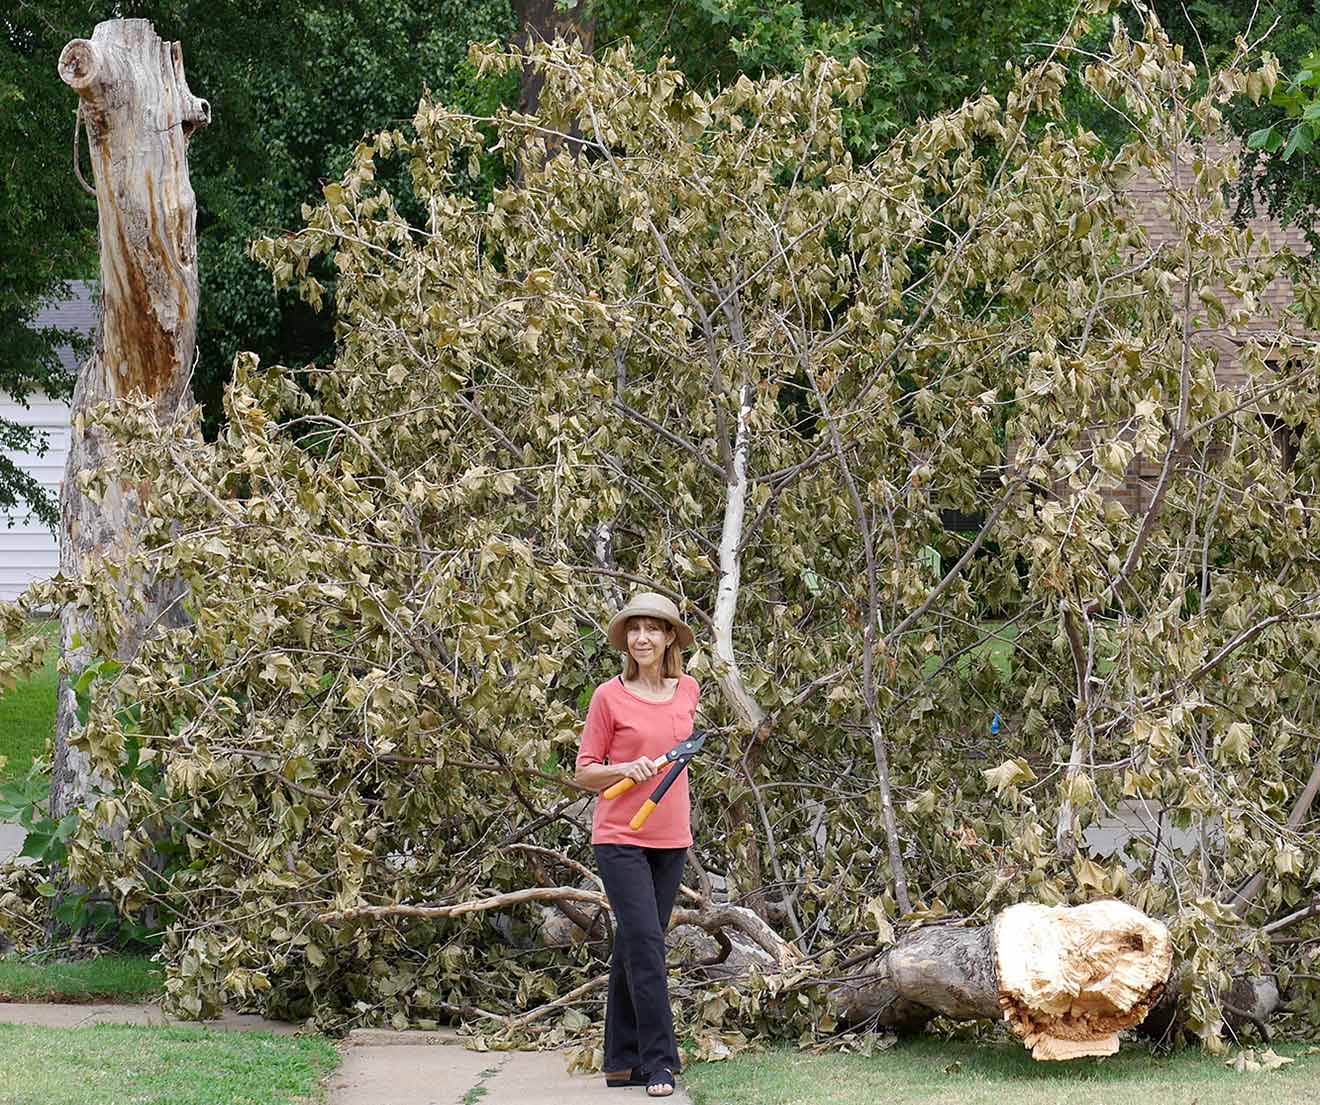 Anne with sycamore tree damaged in recent storm